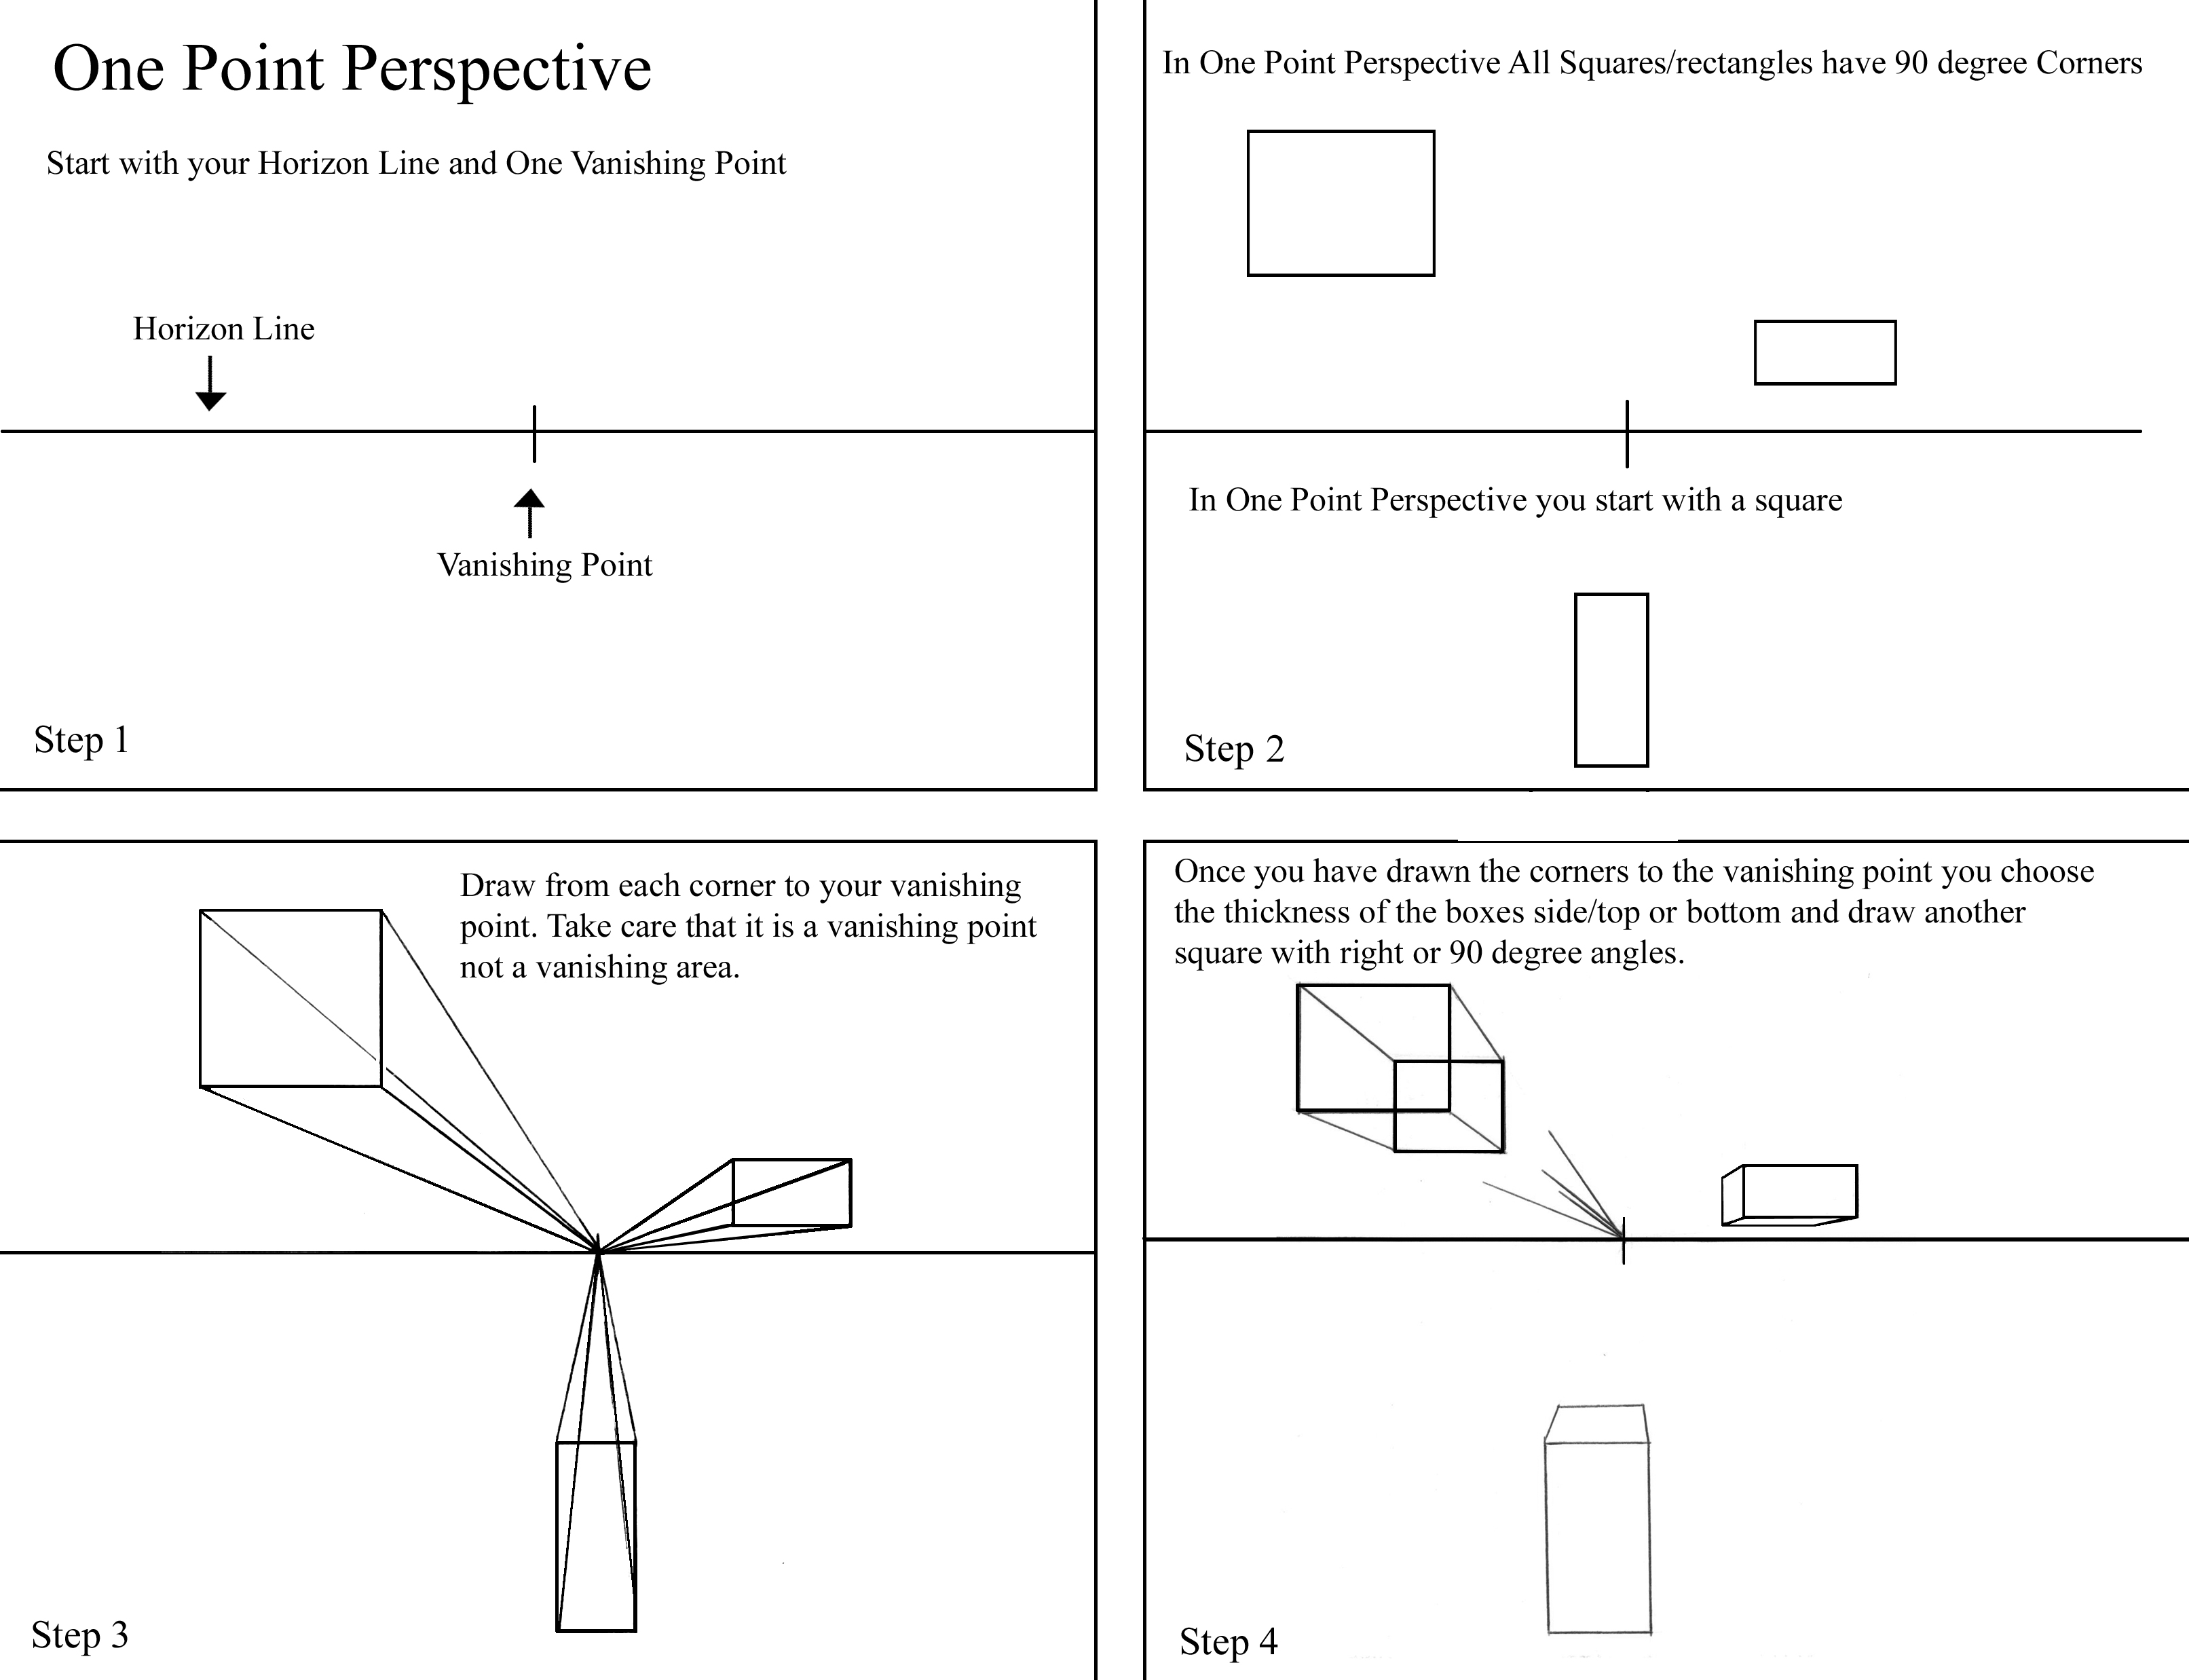 One point perspective part 1 copy - Idaho Art Classes